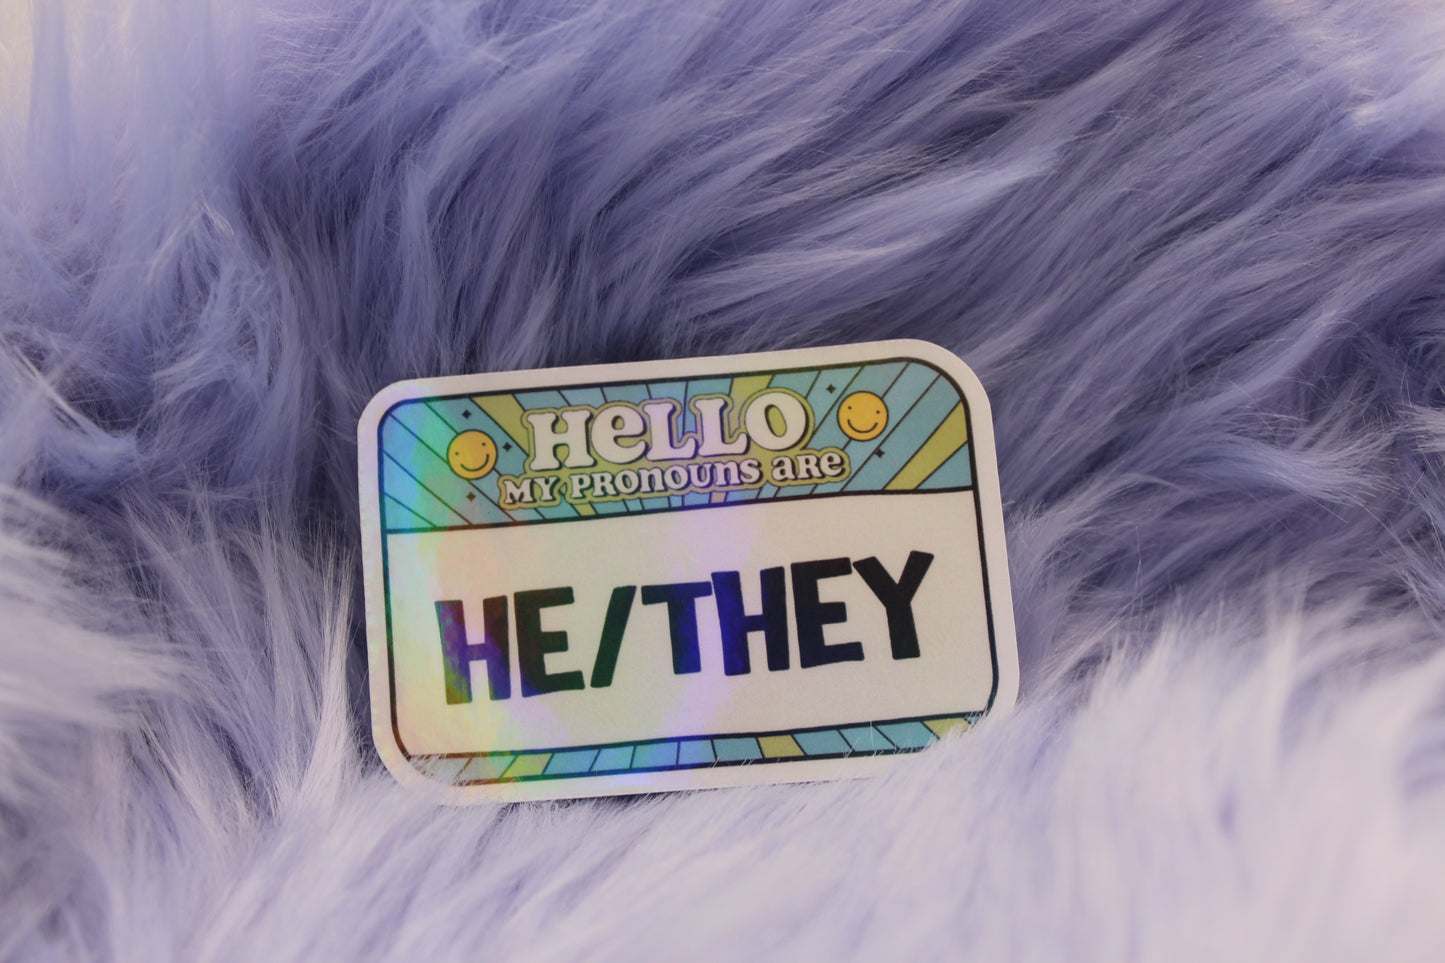 My Pronouns Are He/They